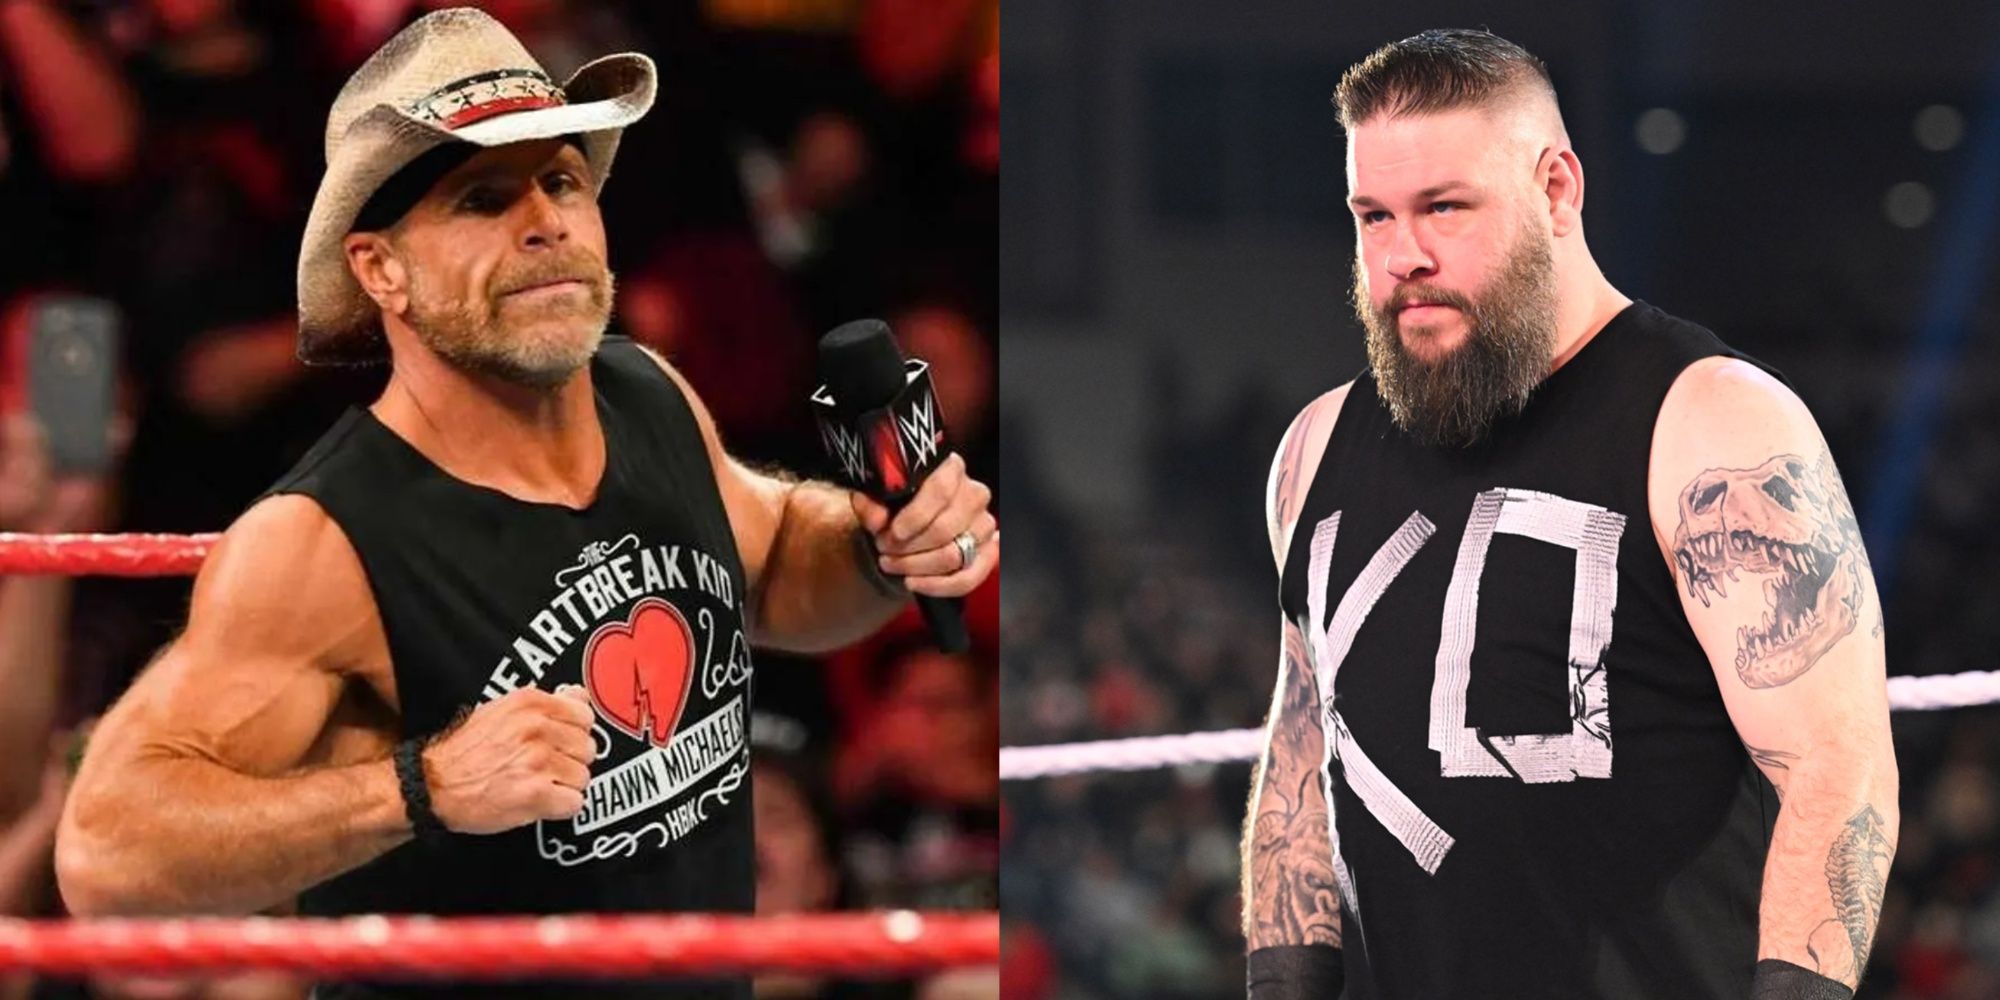 shawn michaels and kevin owens